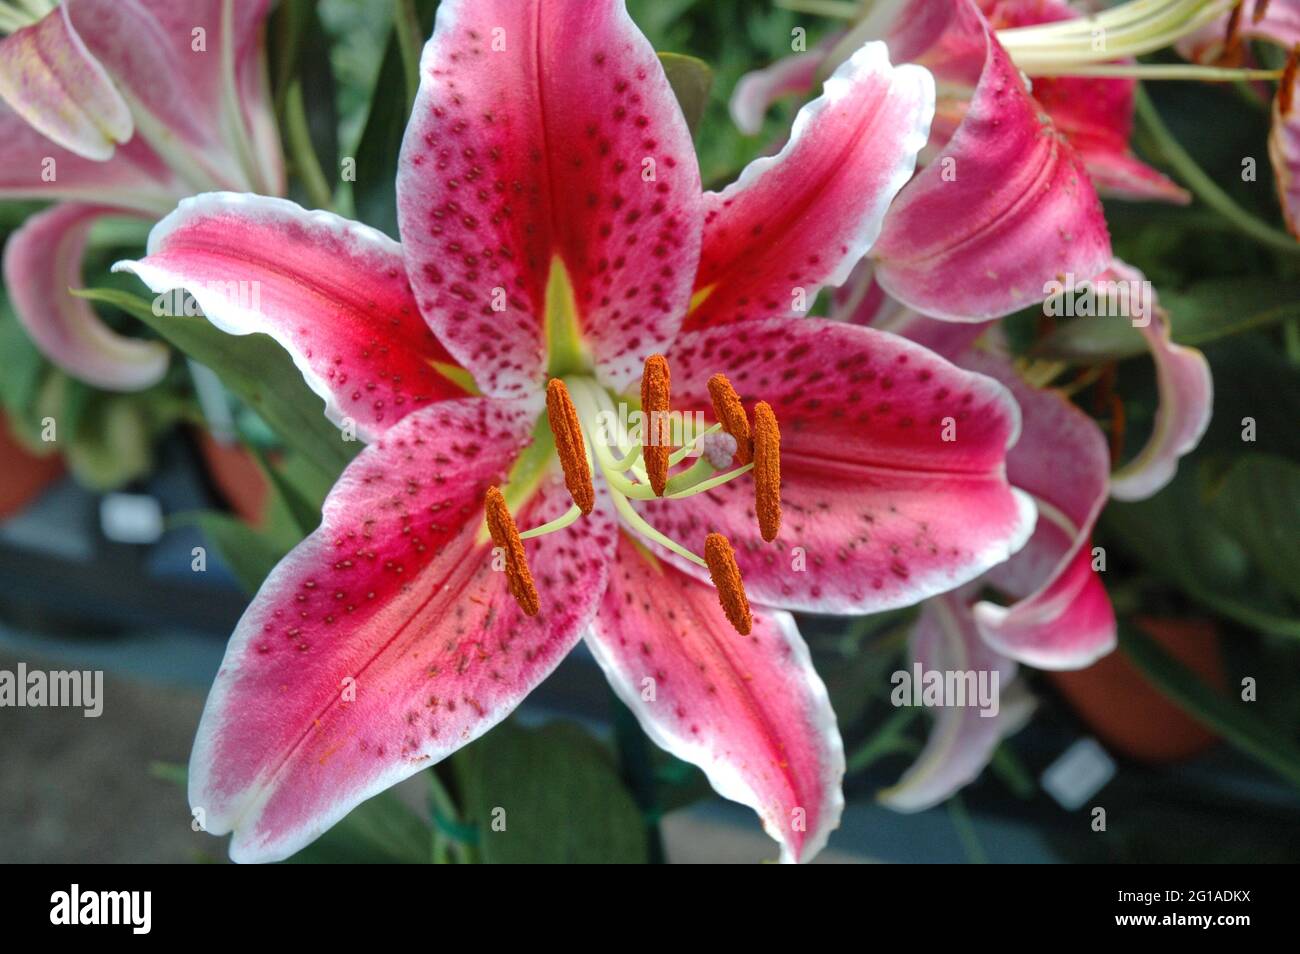 Closeup of a pink day lily with white edging Stock Photo